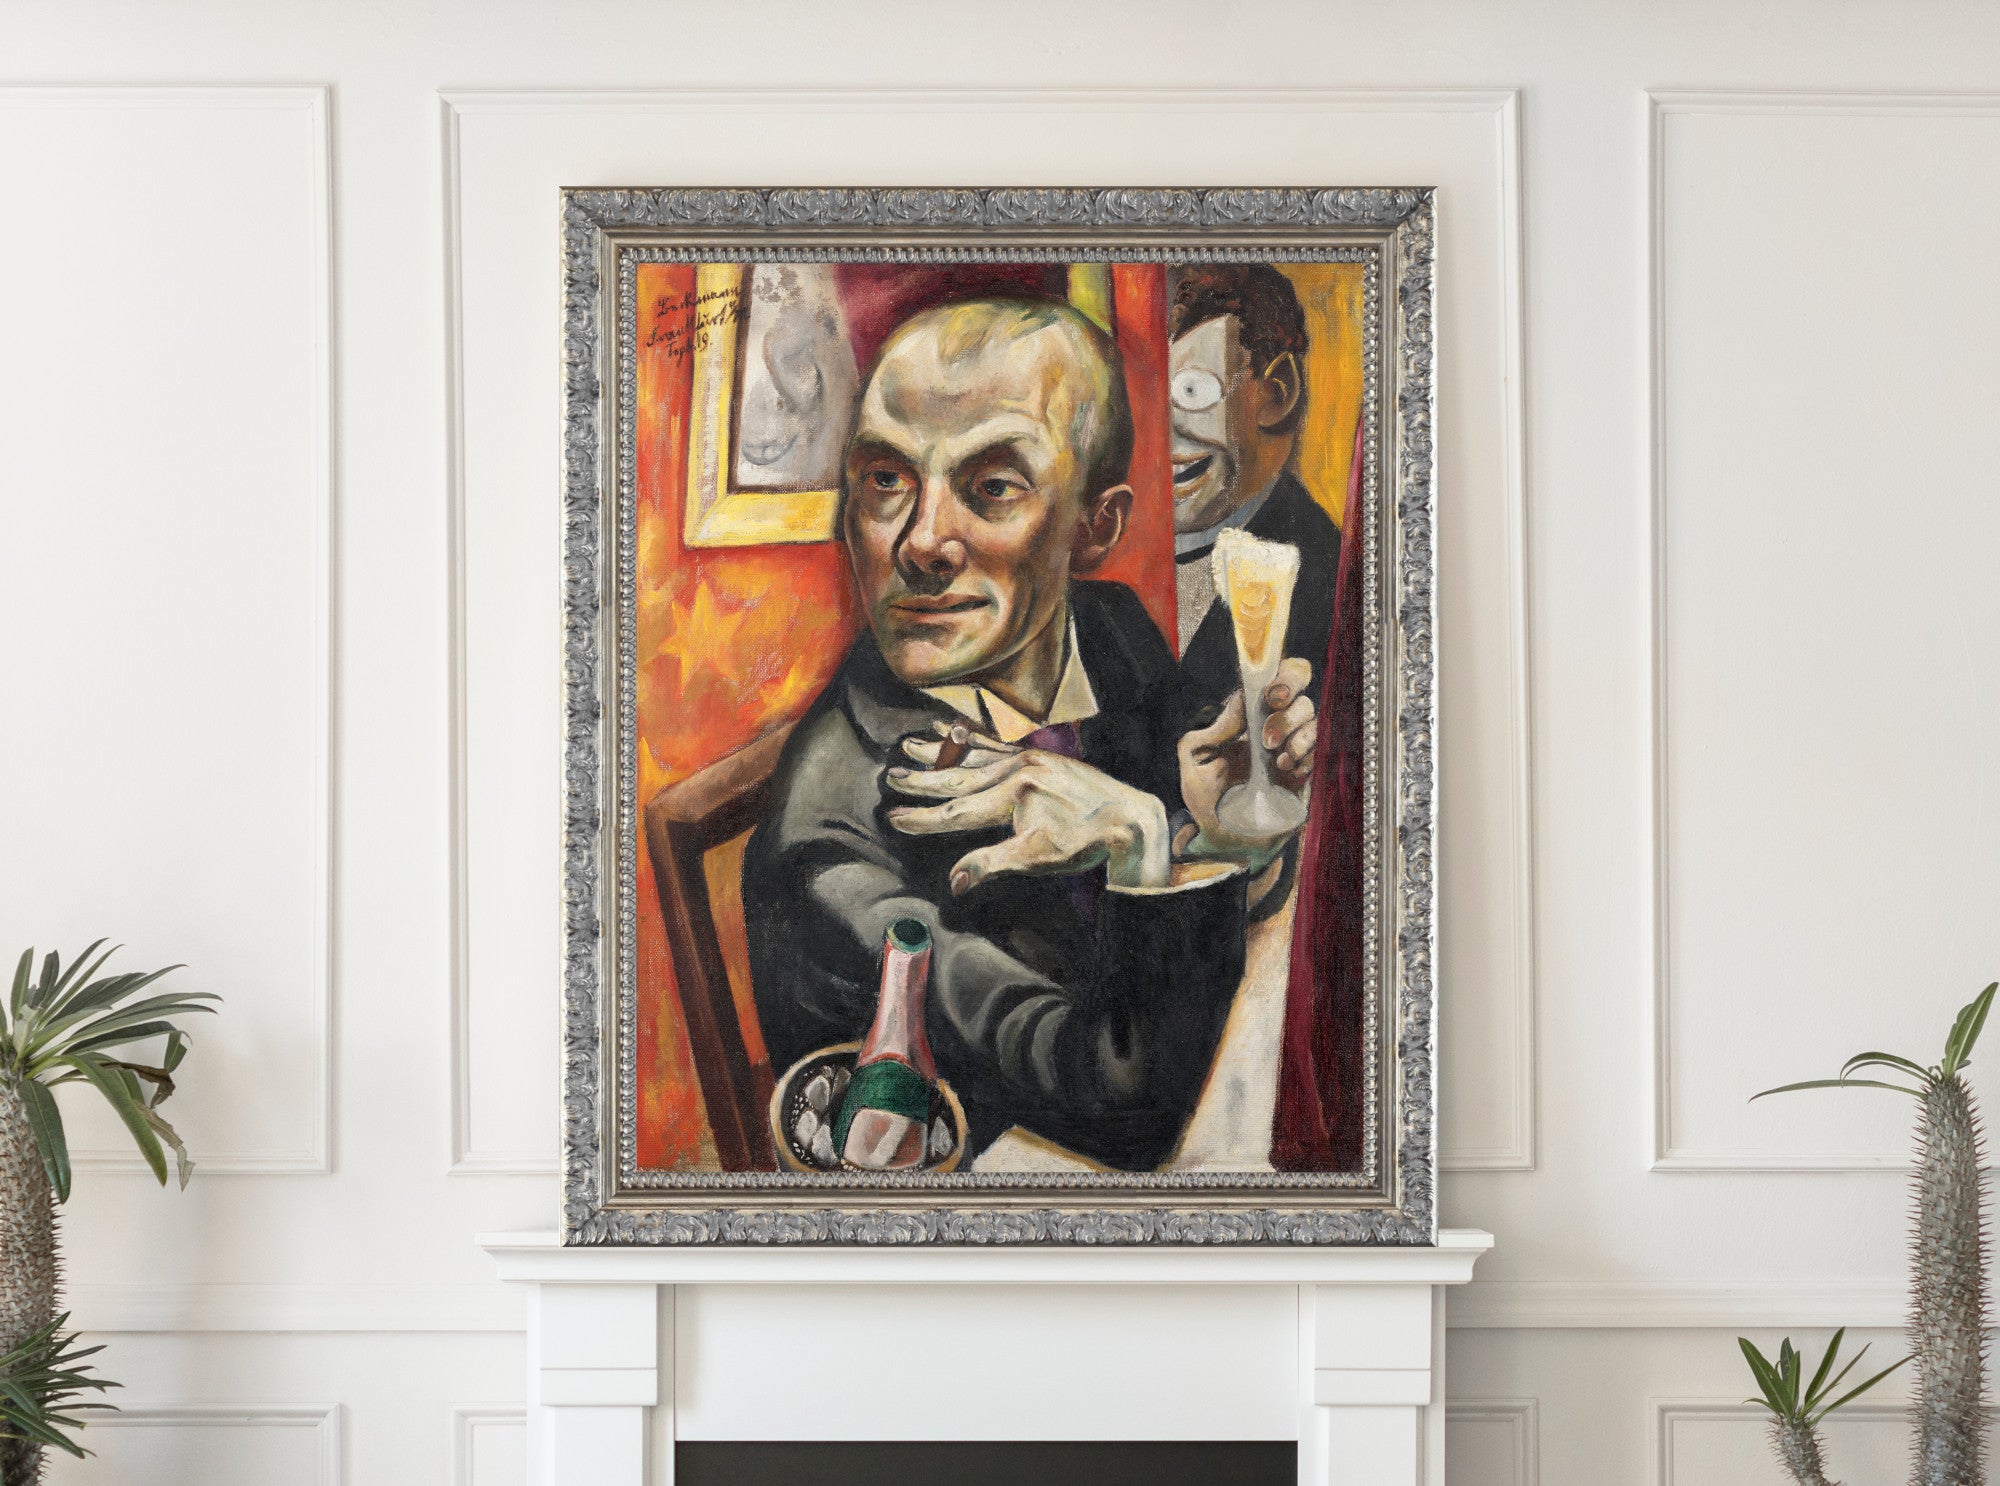 Max Beckmann, Self-Portrait with Champagne Glass (1919) - New Objectivity